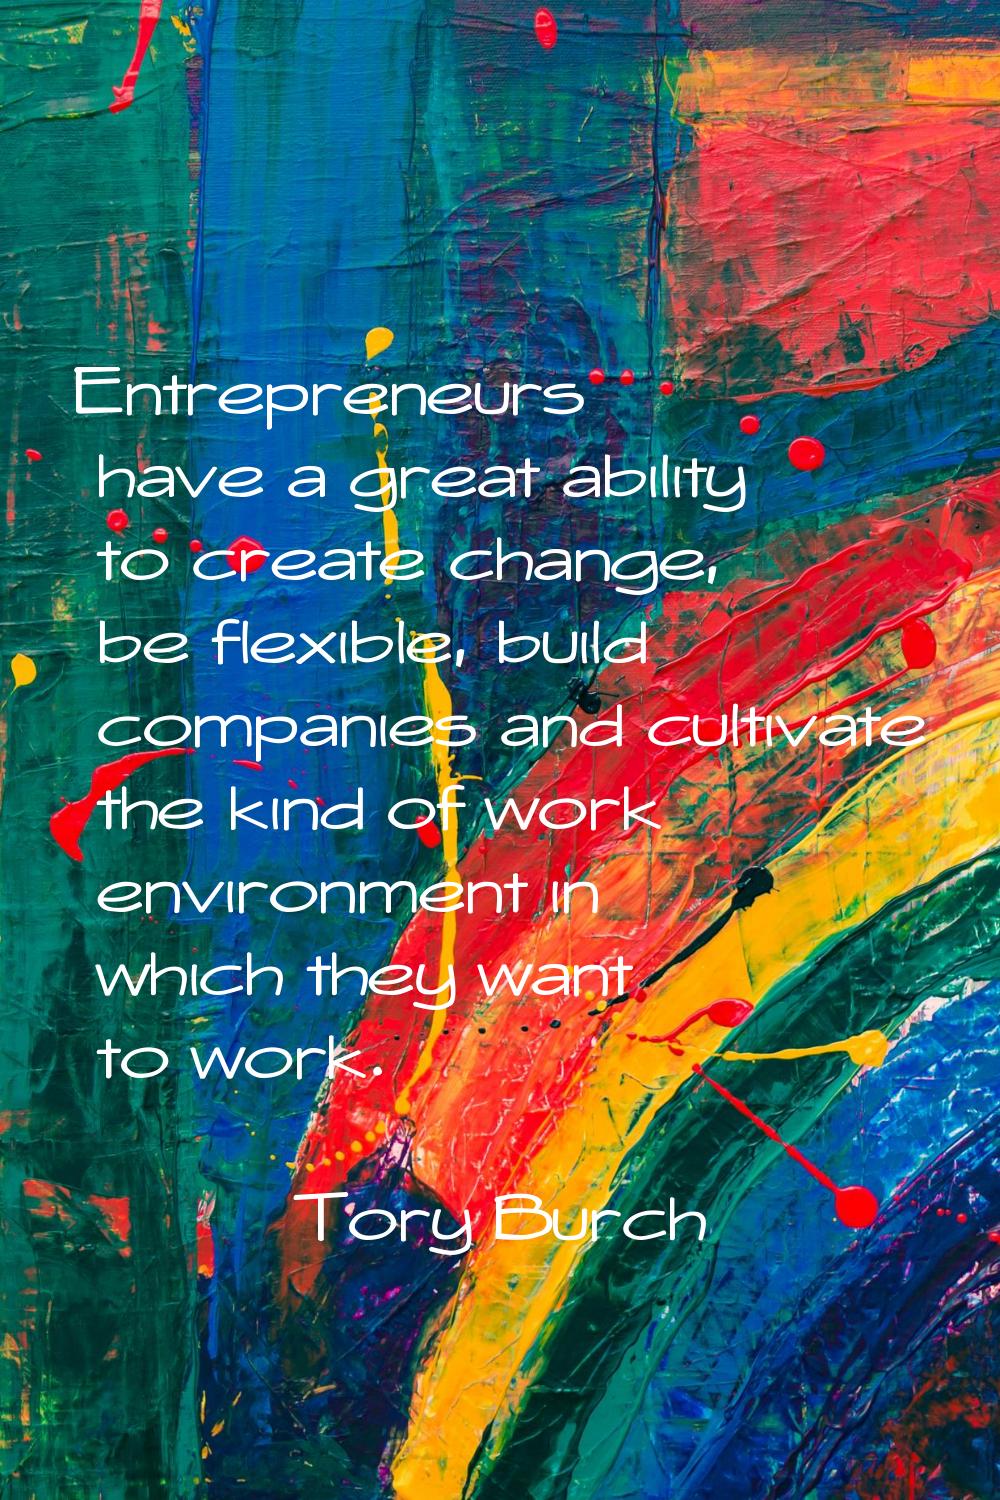 Entrepreneurs have a great ability to create change, be flexible, build companies and cultivate the